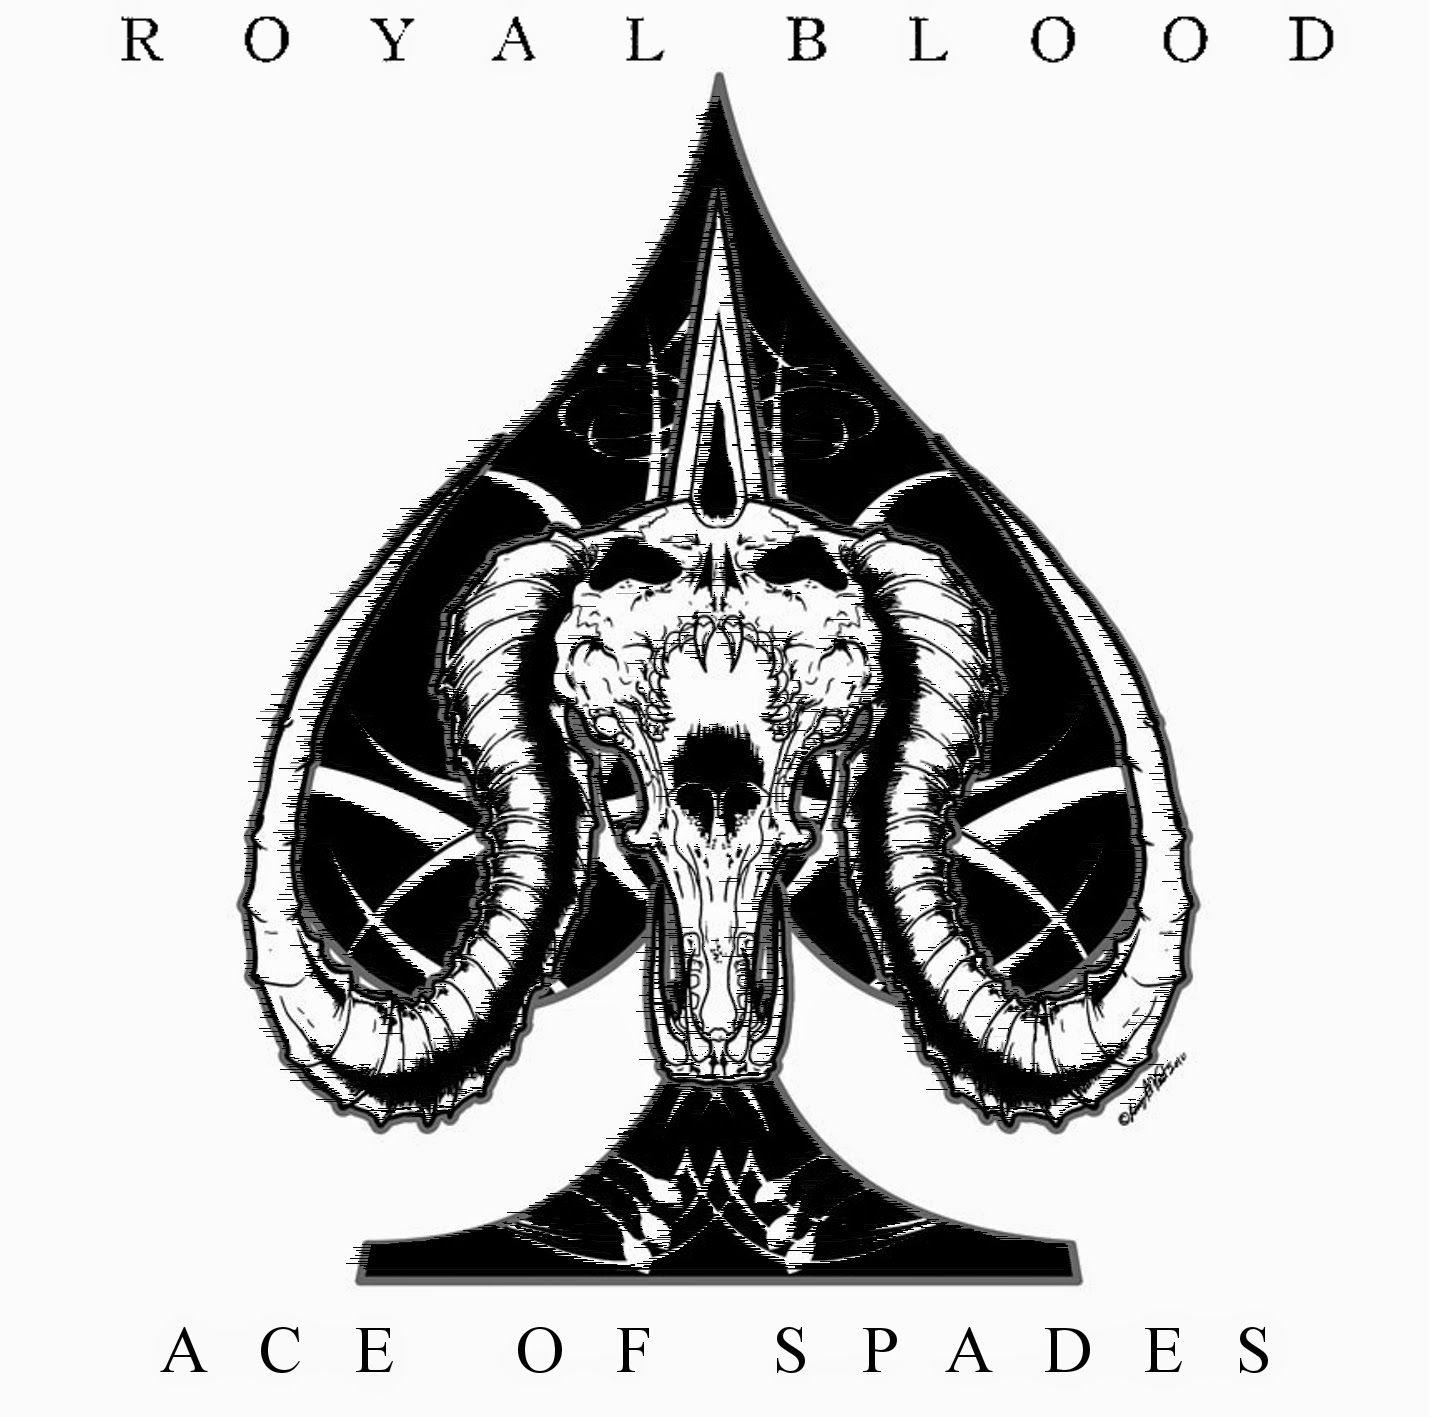 Image result for royal blood album cover ace of spades. Shirts